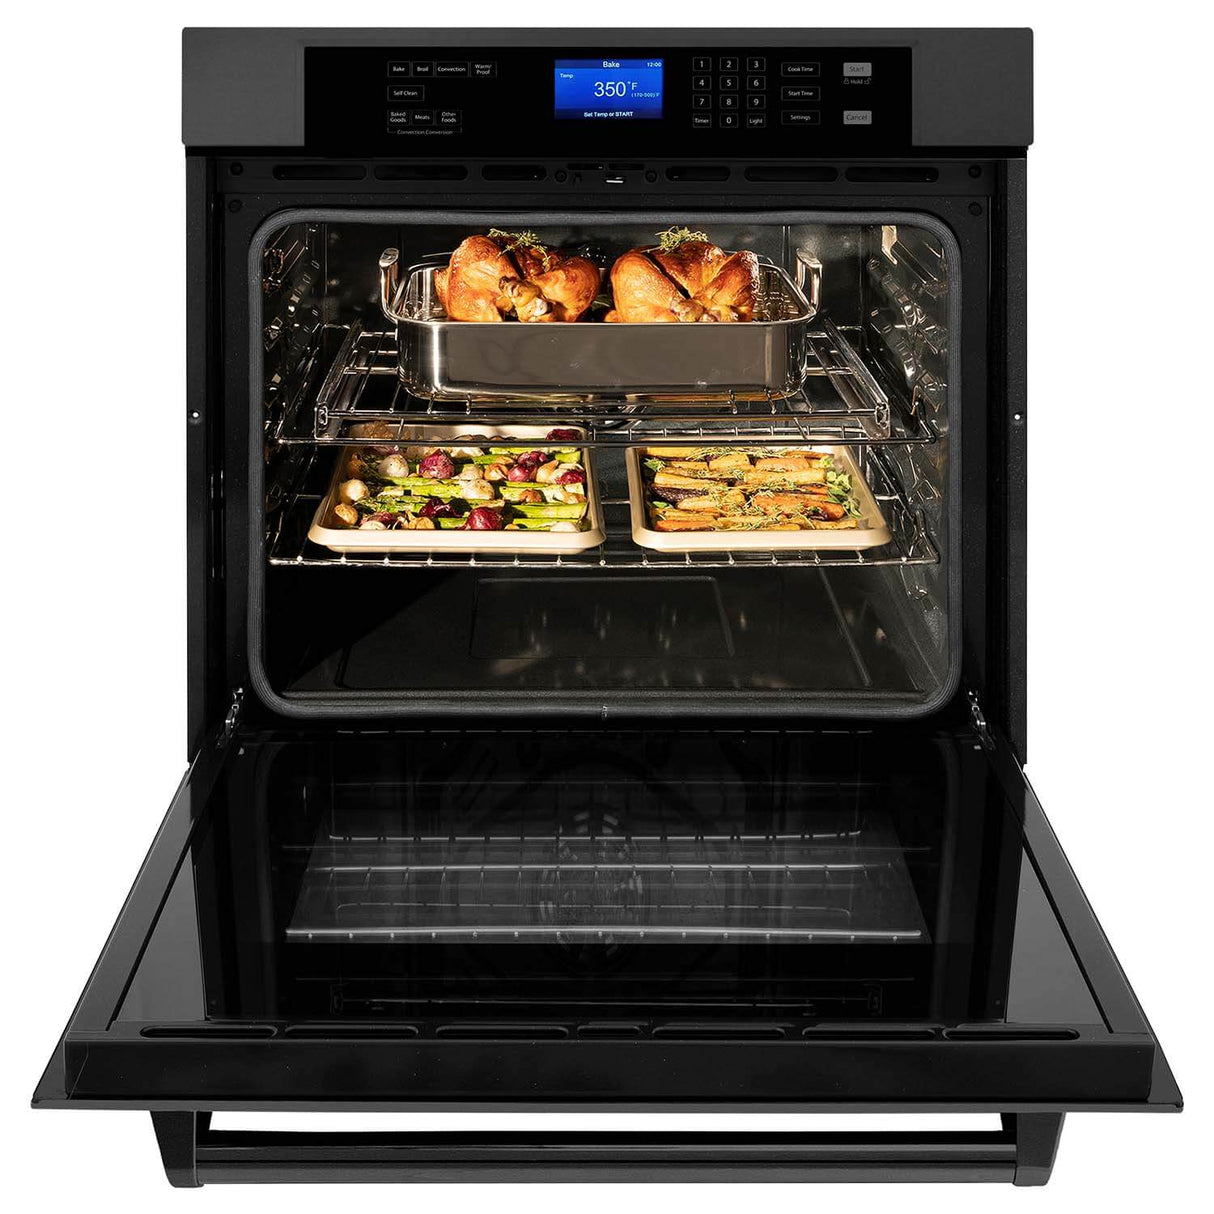 ZLINE 30 in. Professional Electric Single Wall Oven with Self Clean and True Convection in Black Stainless Steel (AWS-30-BS)